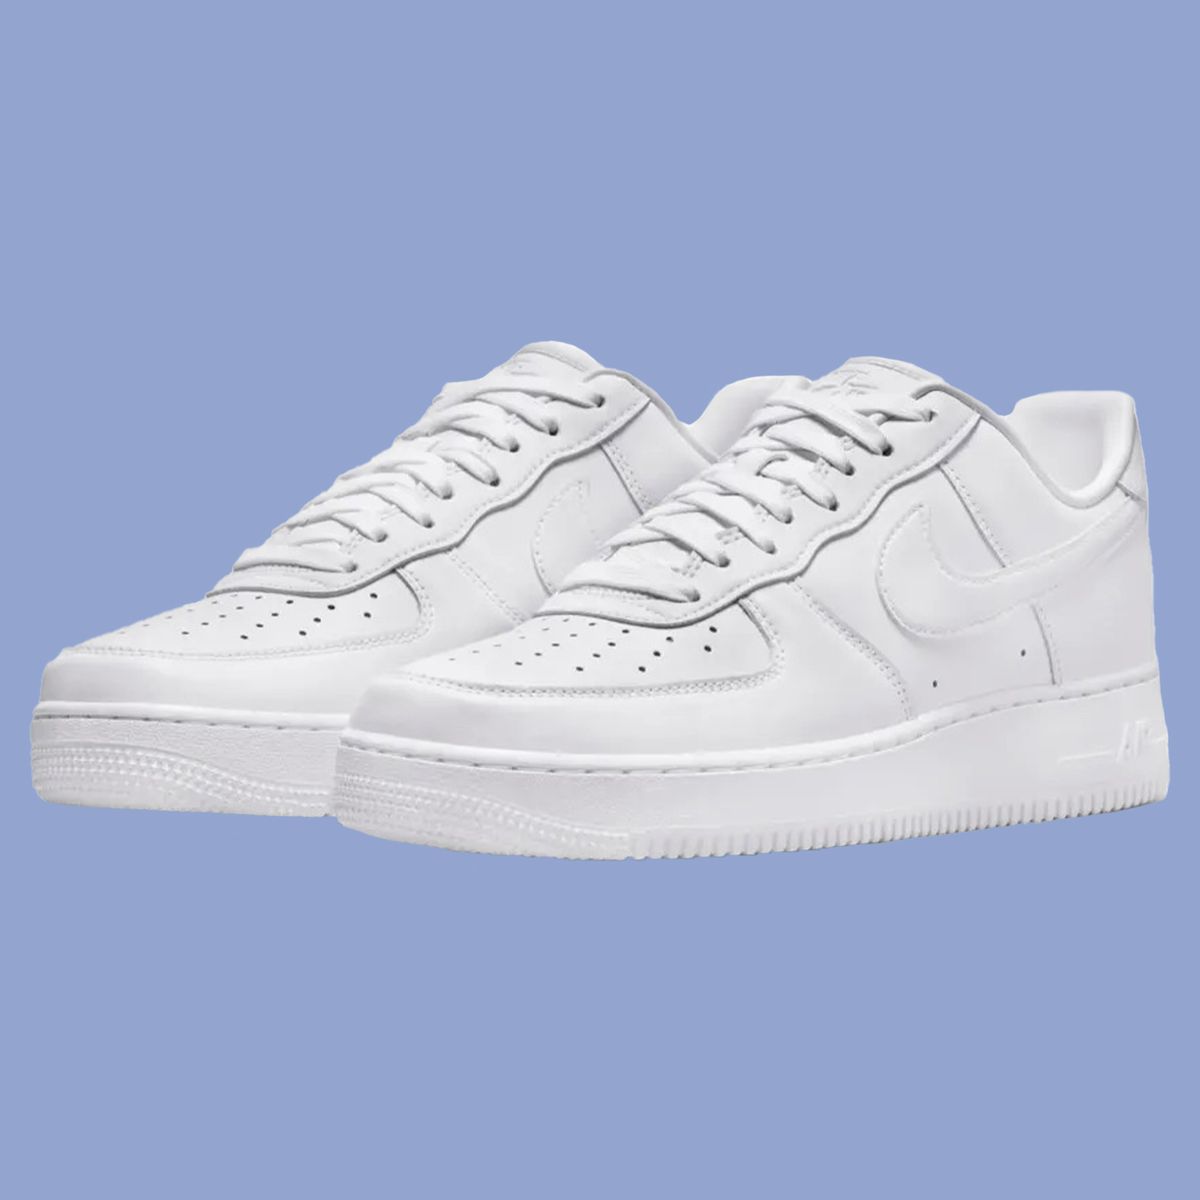 Desarmado atractivo elemento Nike's New Air Force 1s Are Designed to Look Fresh Forever. Will It Work?